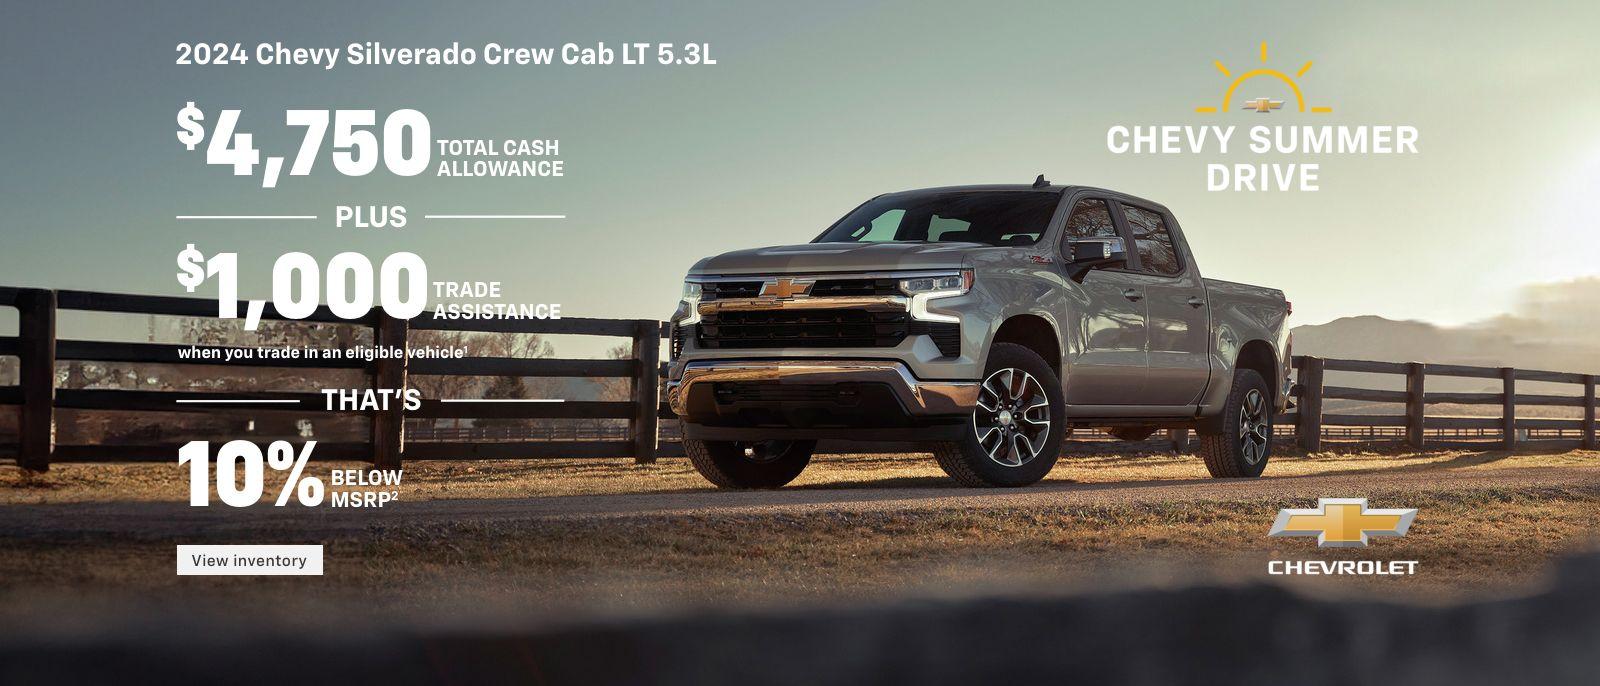 2024 Chevy Silverado 1500 Crew Cab LT 5.3L. Accept all challenges. $4,750 total cash allowance. Plus, $1,000 trade assistance when you trade in an eligible vehicle. That's, 10% below MSRP.